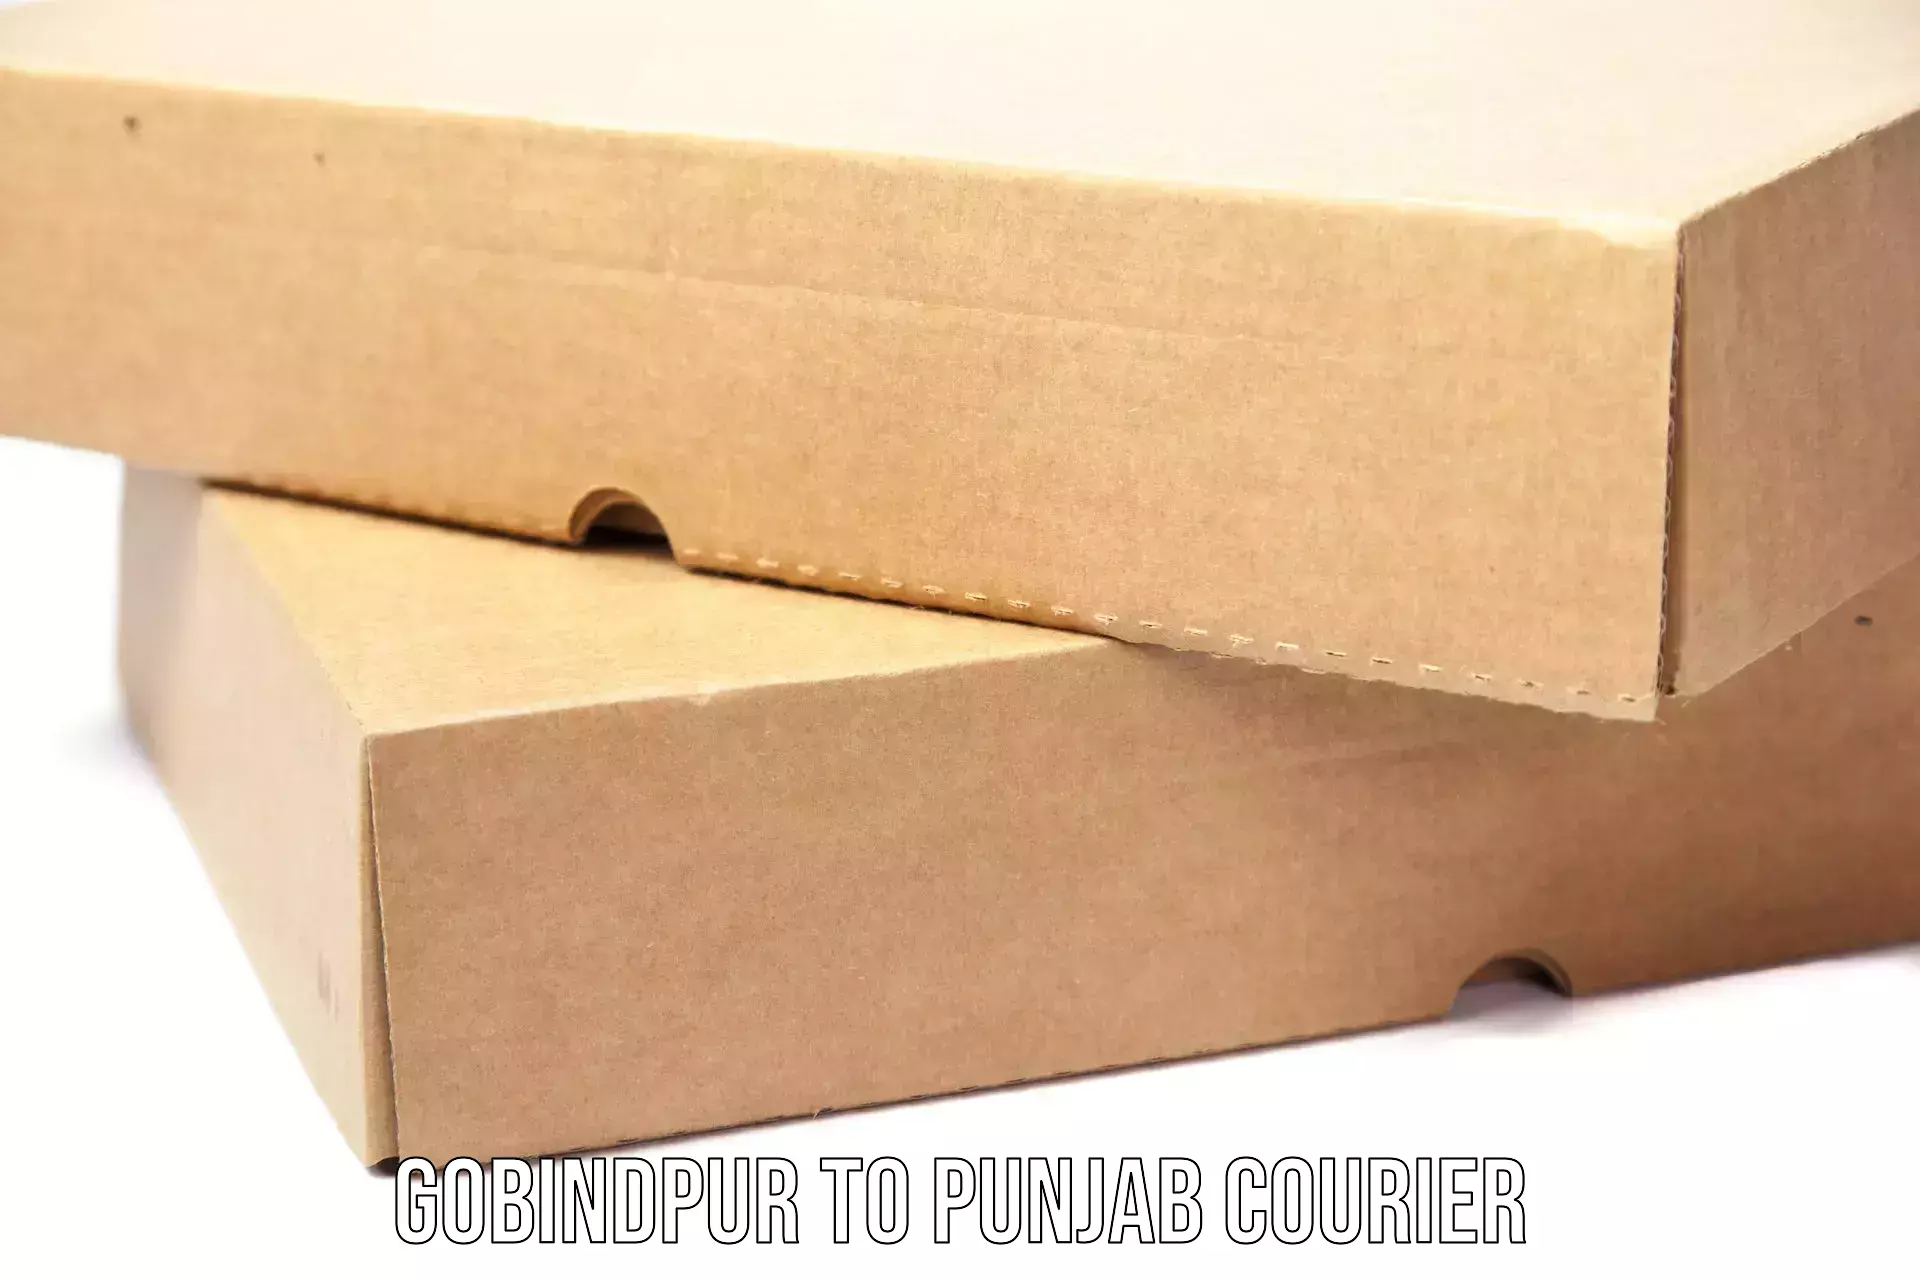 Cost-effective courier options Gobindpur to Punjab